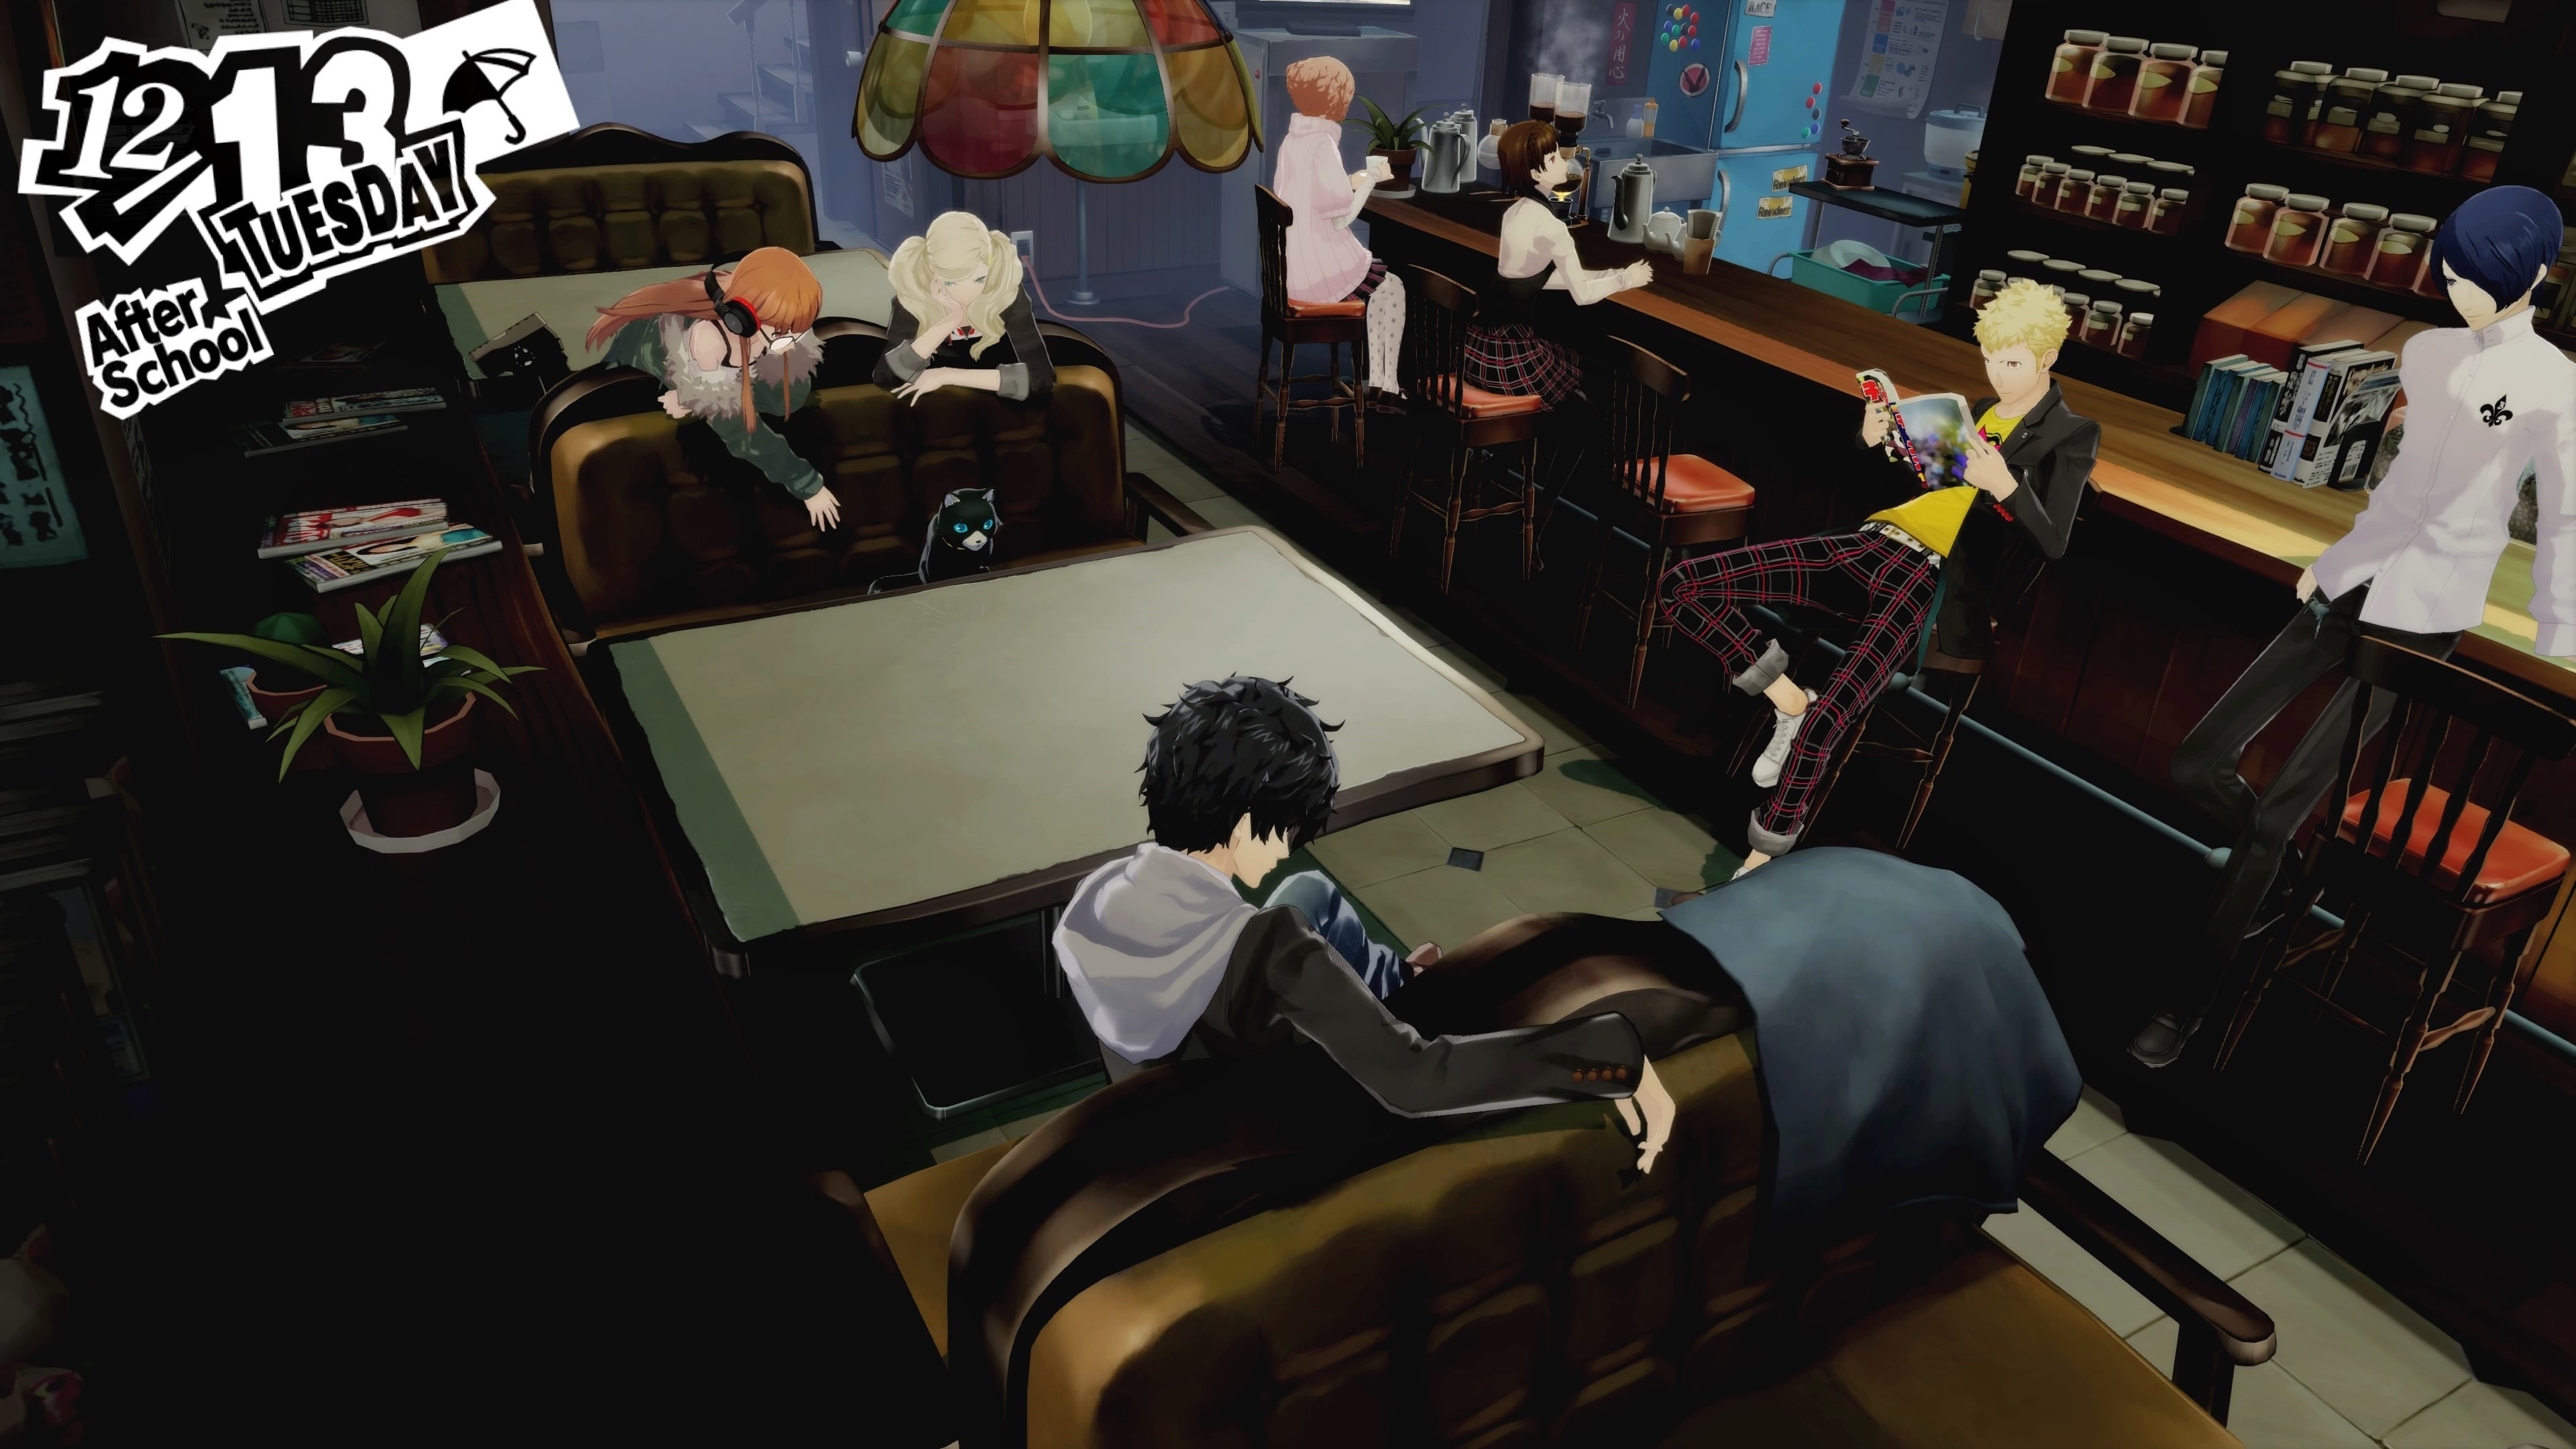 Persona 5 Royal Early Review Impressions - GameSpot